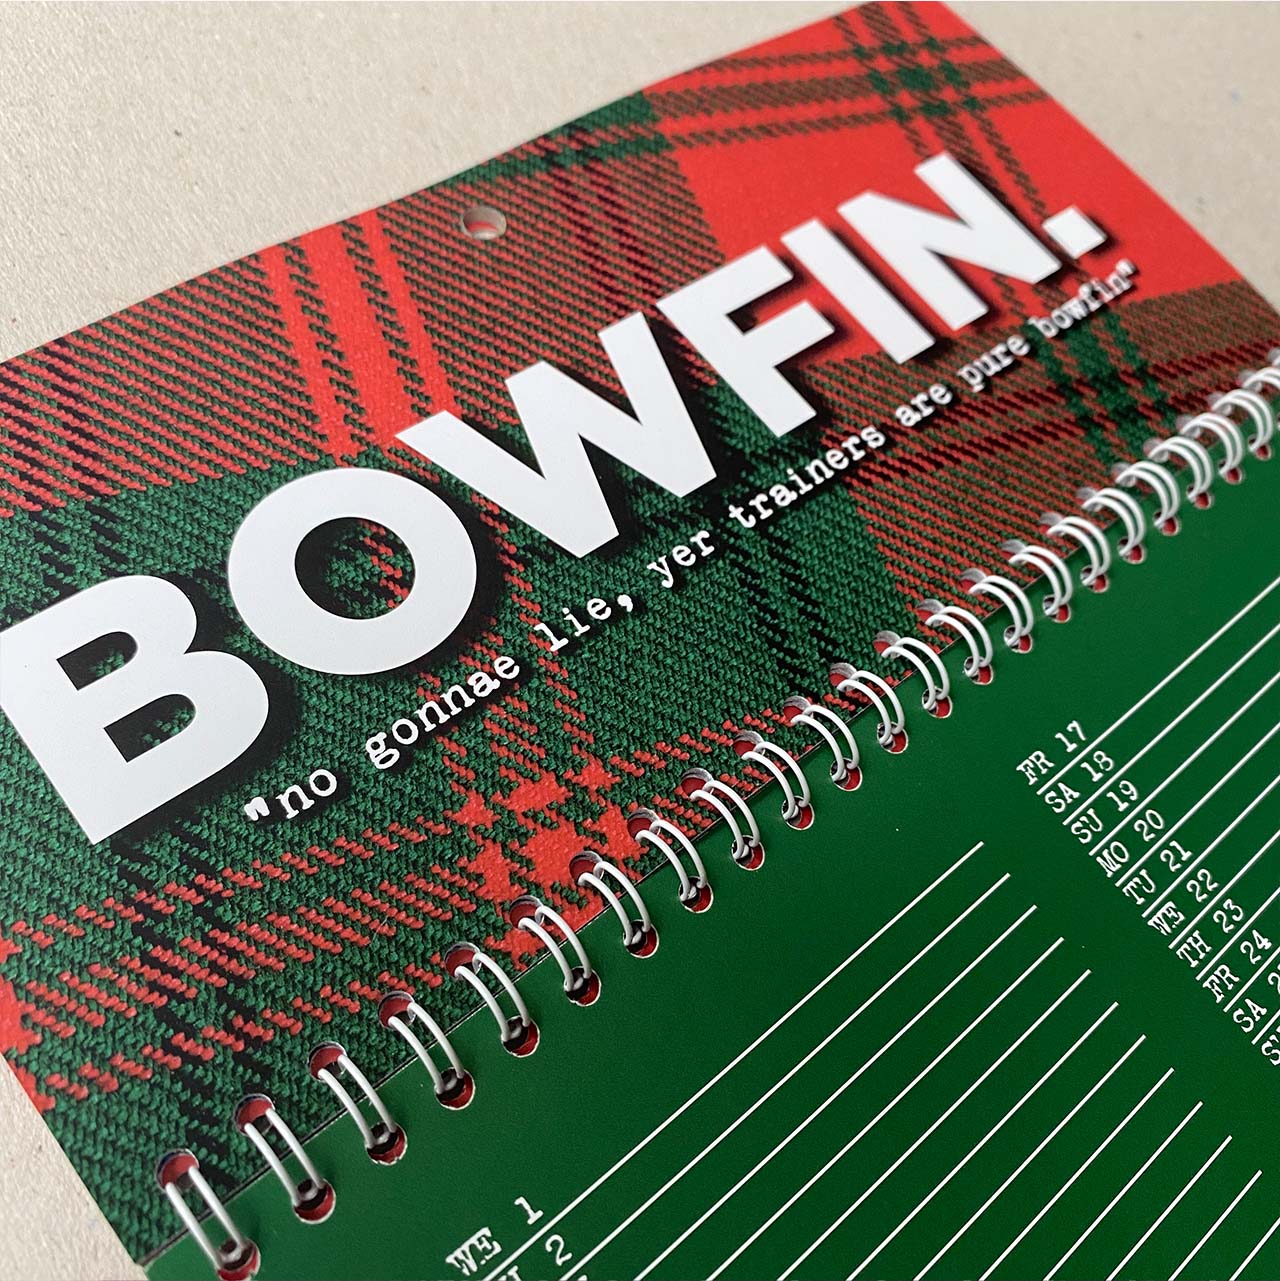 Red and Green Tartan Calendar with Scots Word Bowfin printed.. 